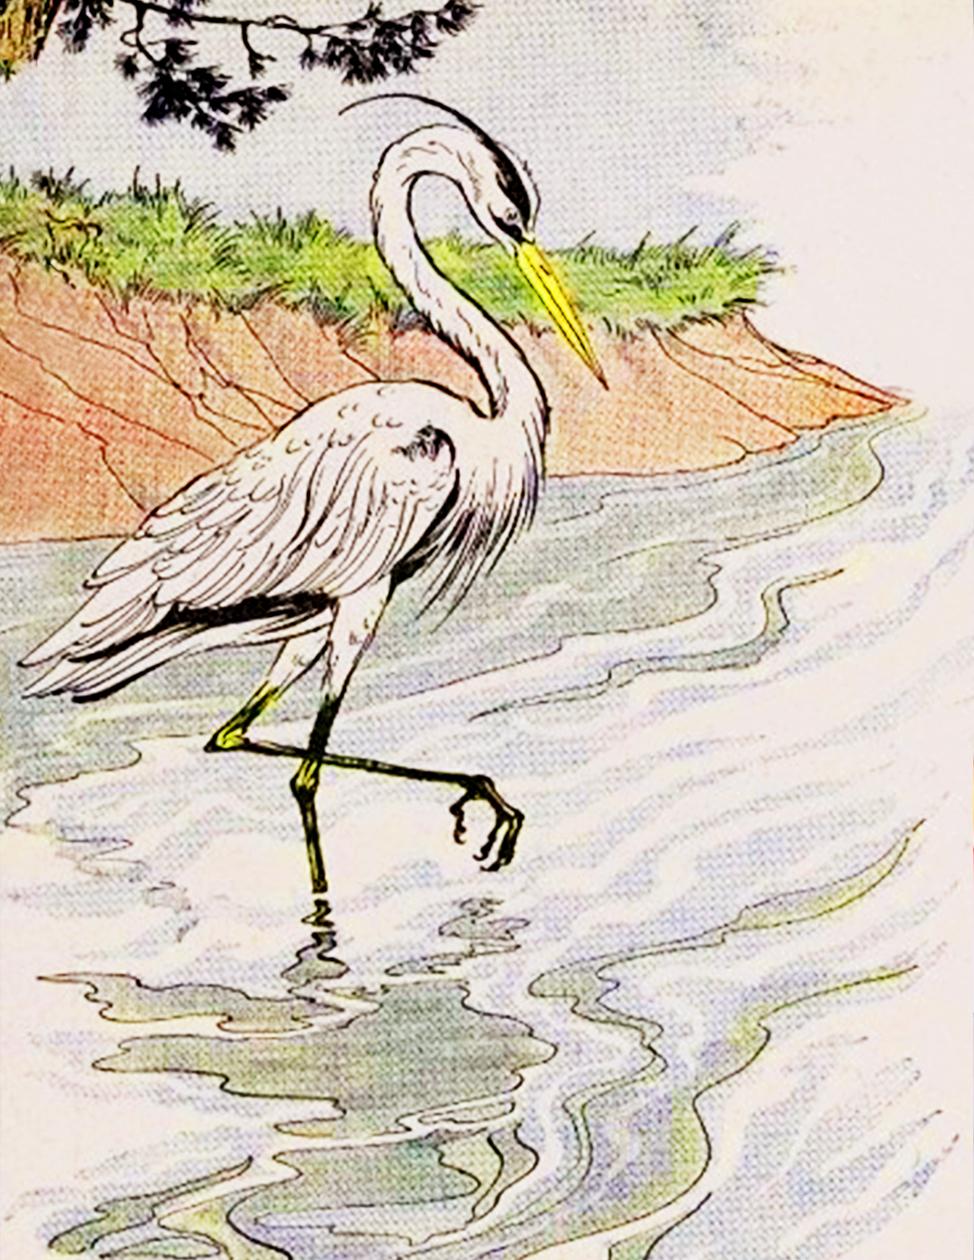 “The Heron” illustrated by Milo Winter, from “The Aesop for Children,” 1919. (PD-US)